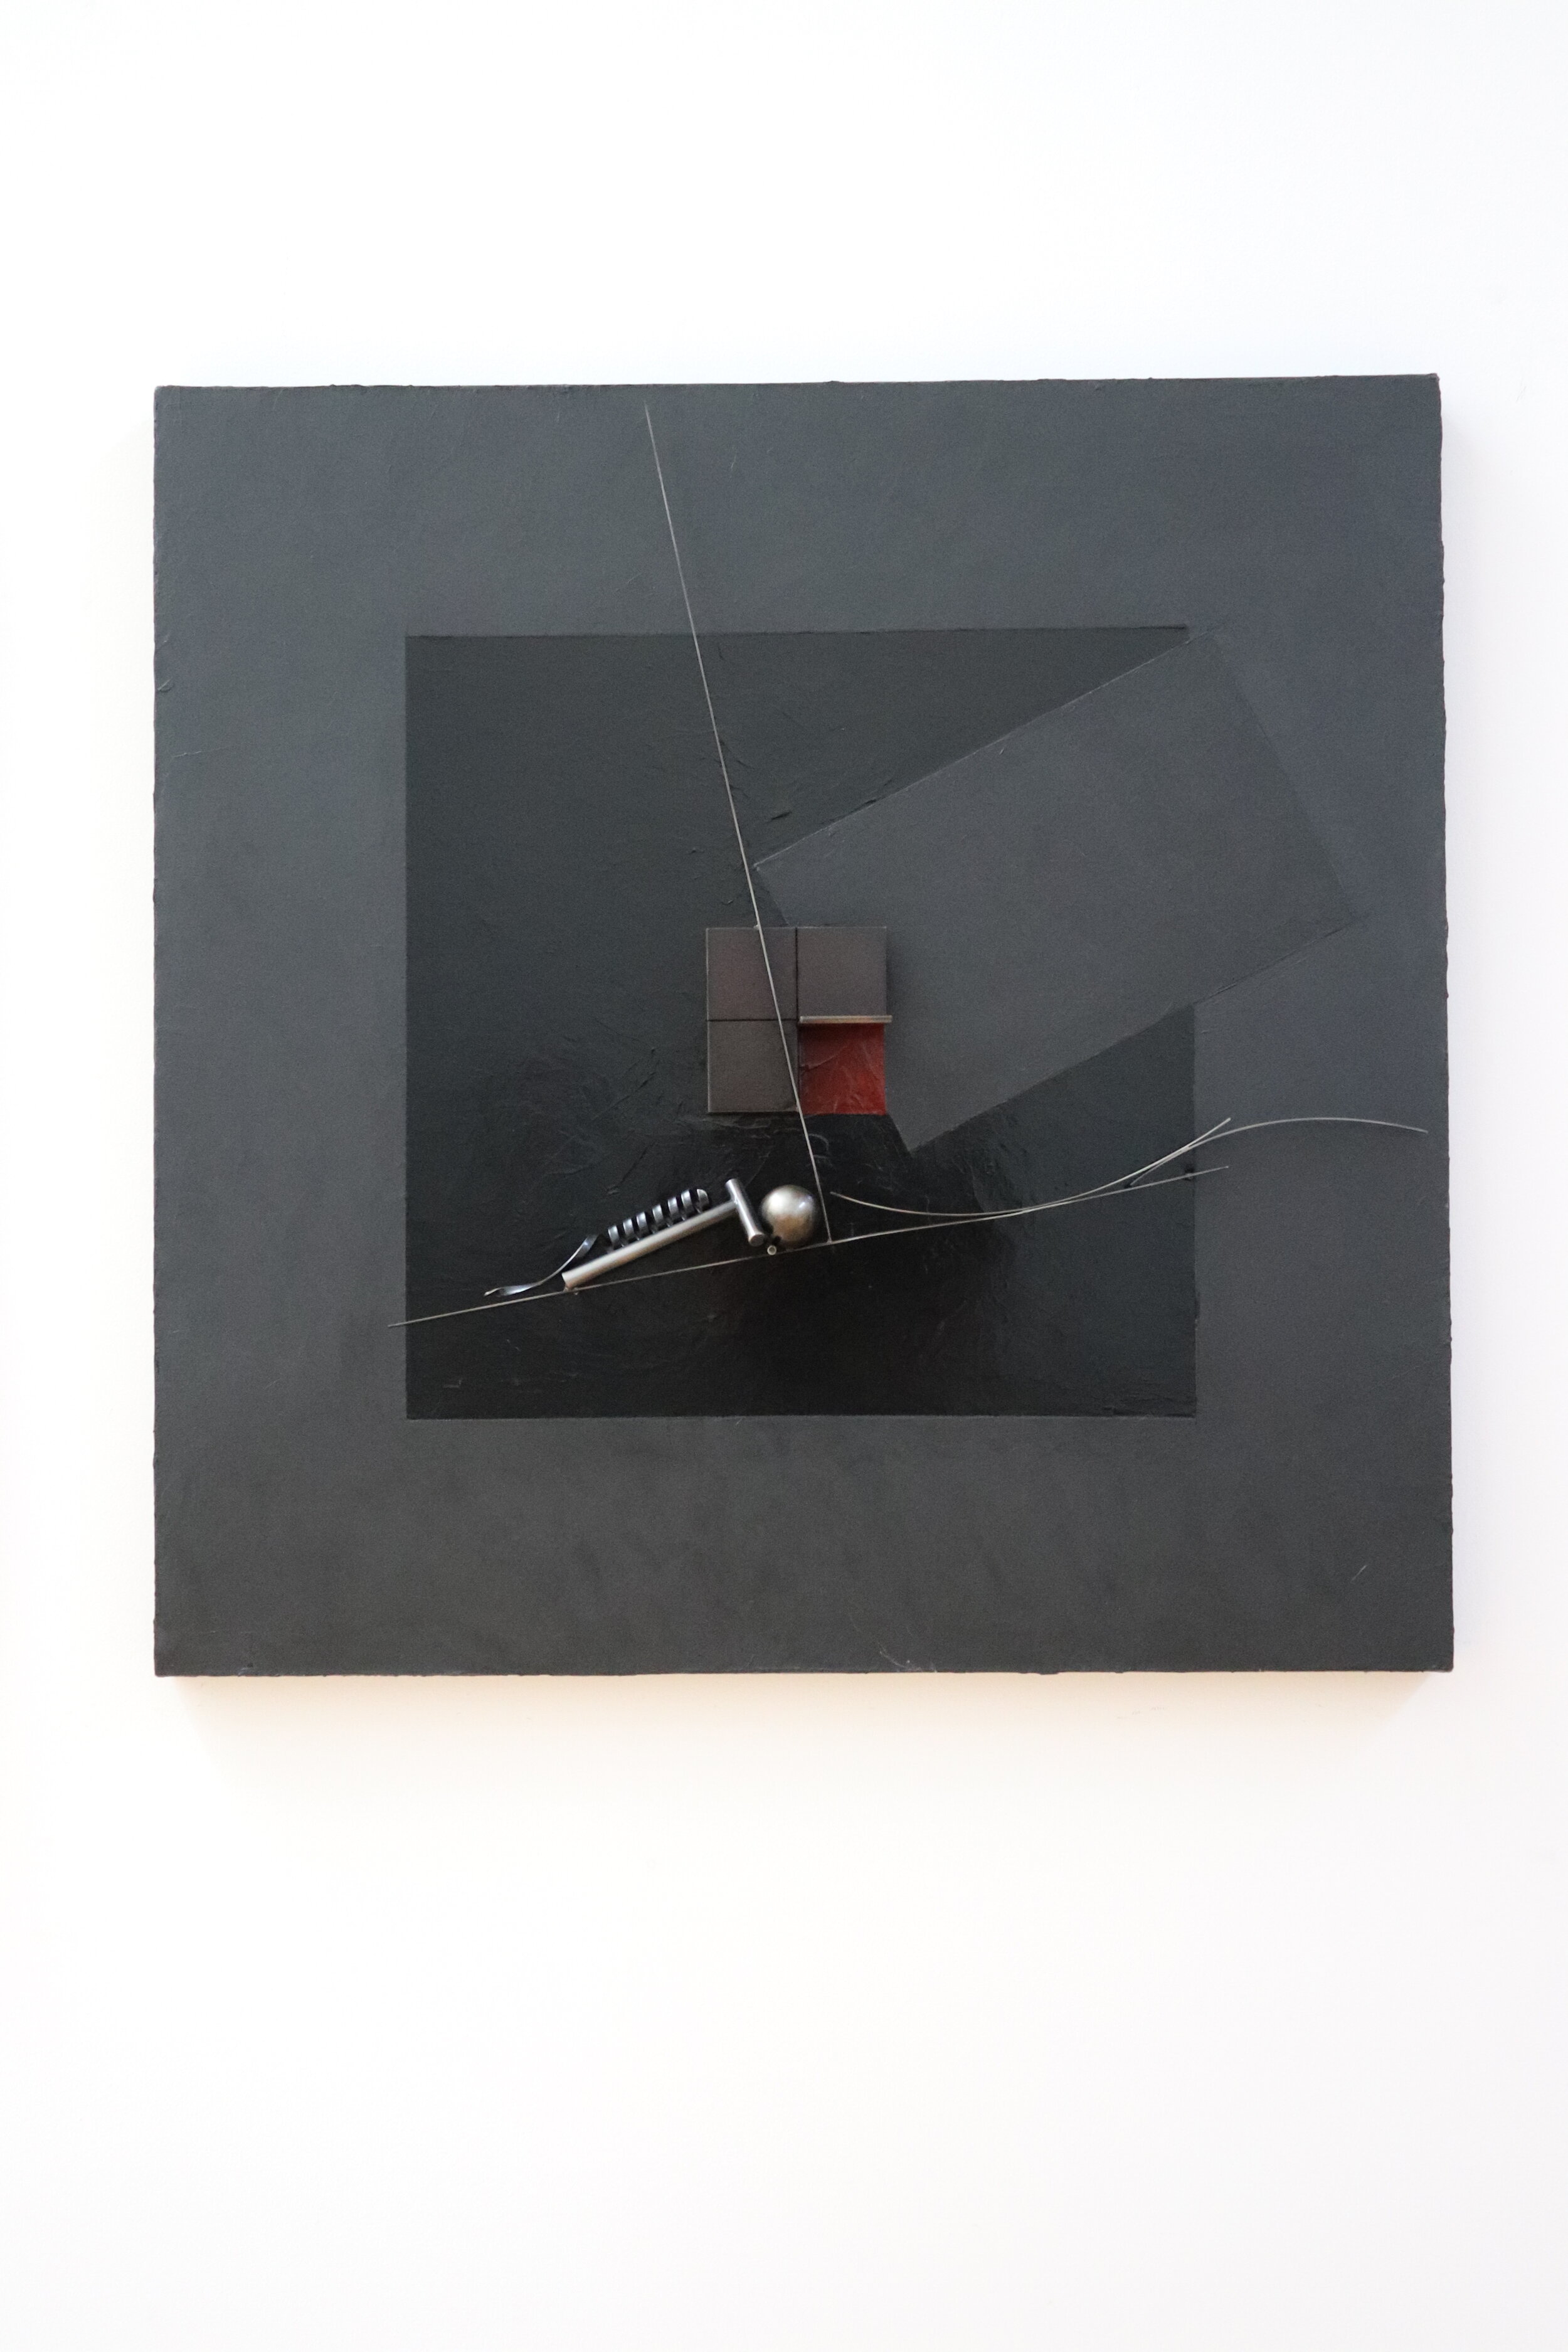 Steel Painting, Black Square No. 18, 2013